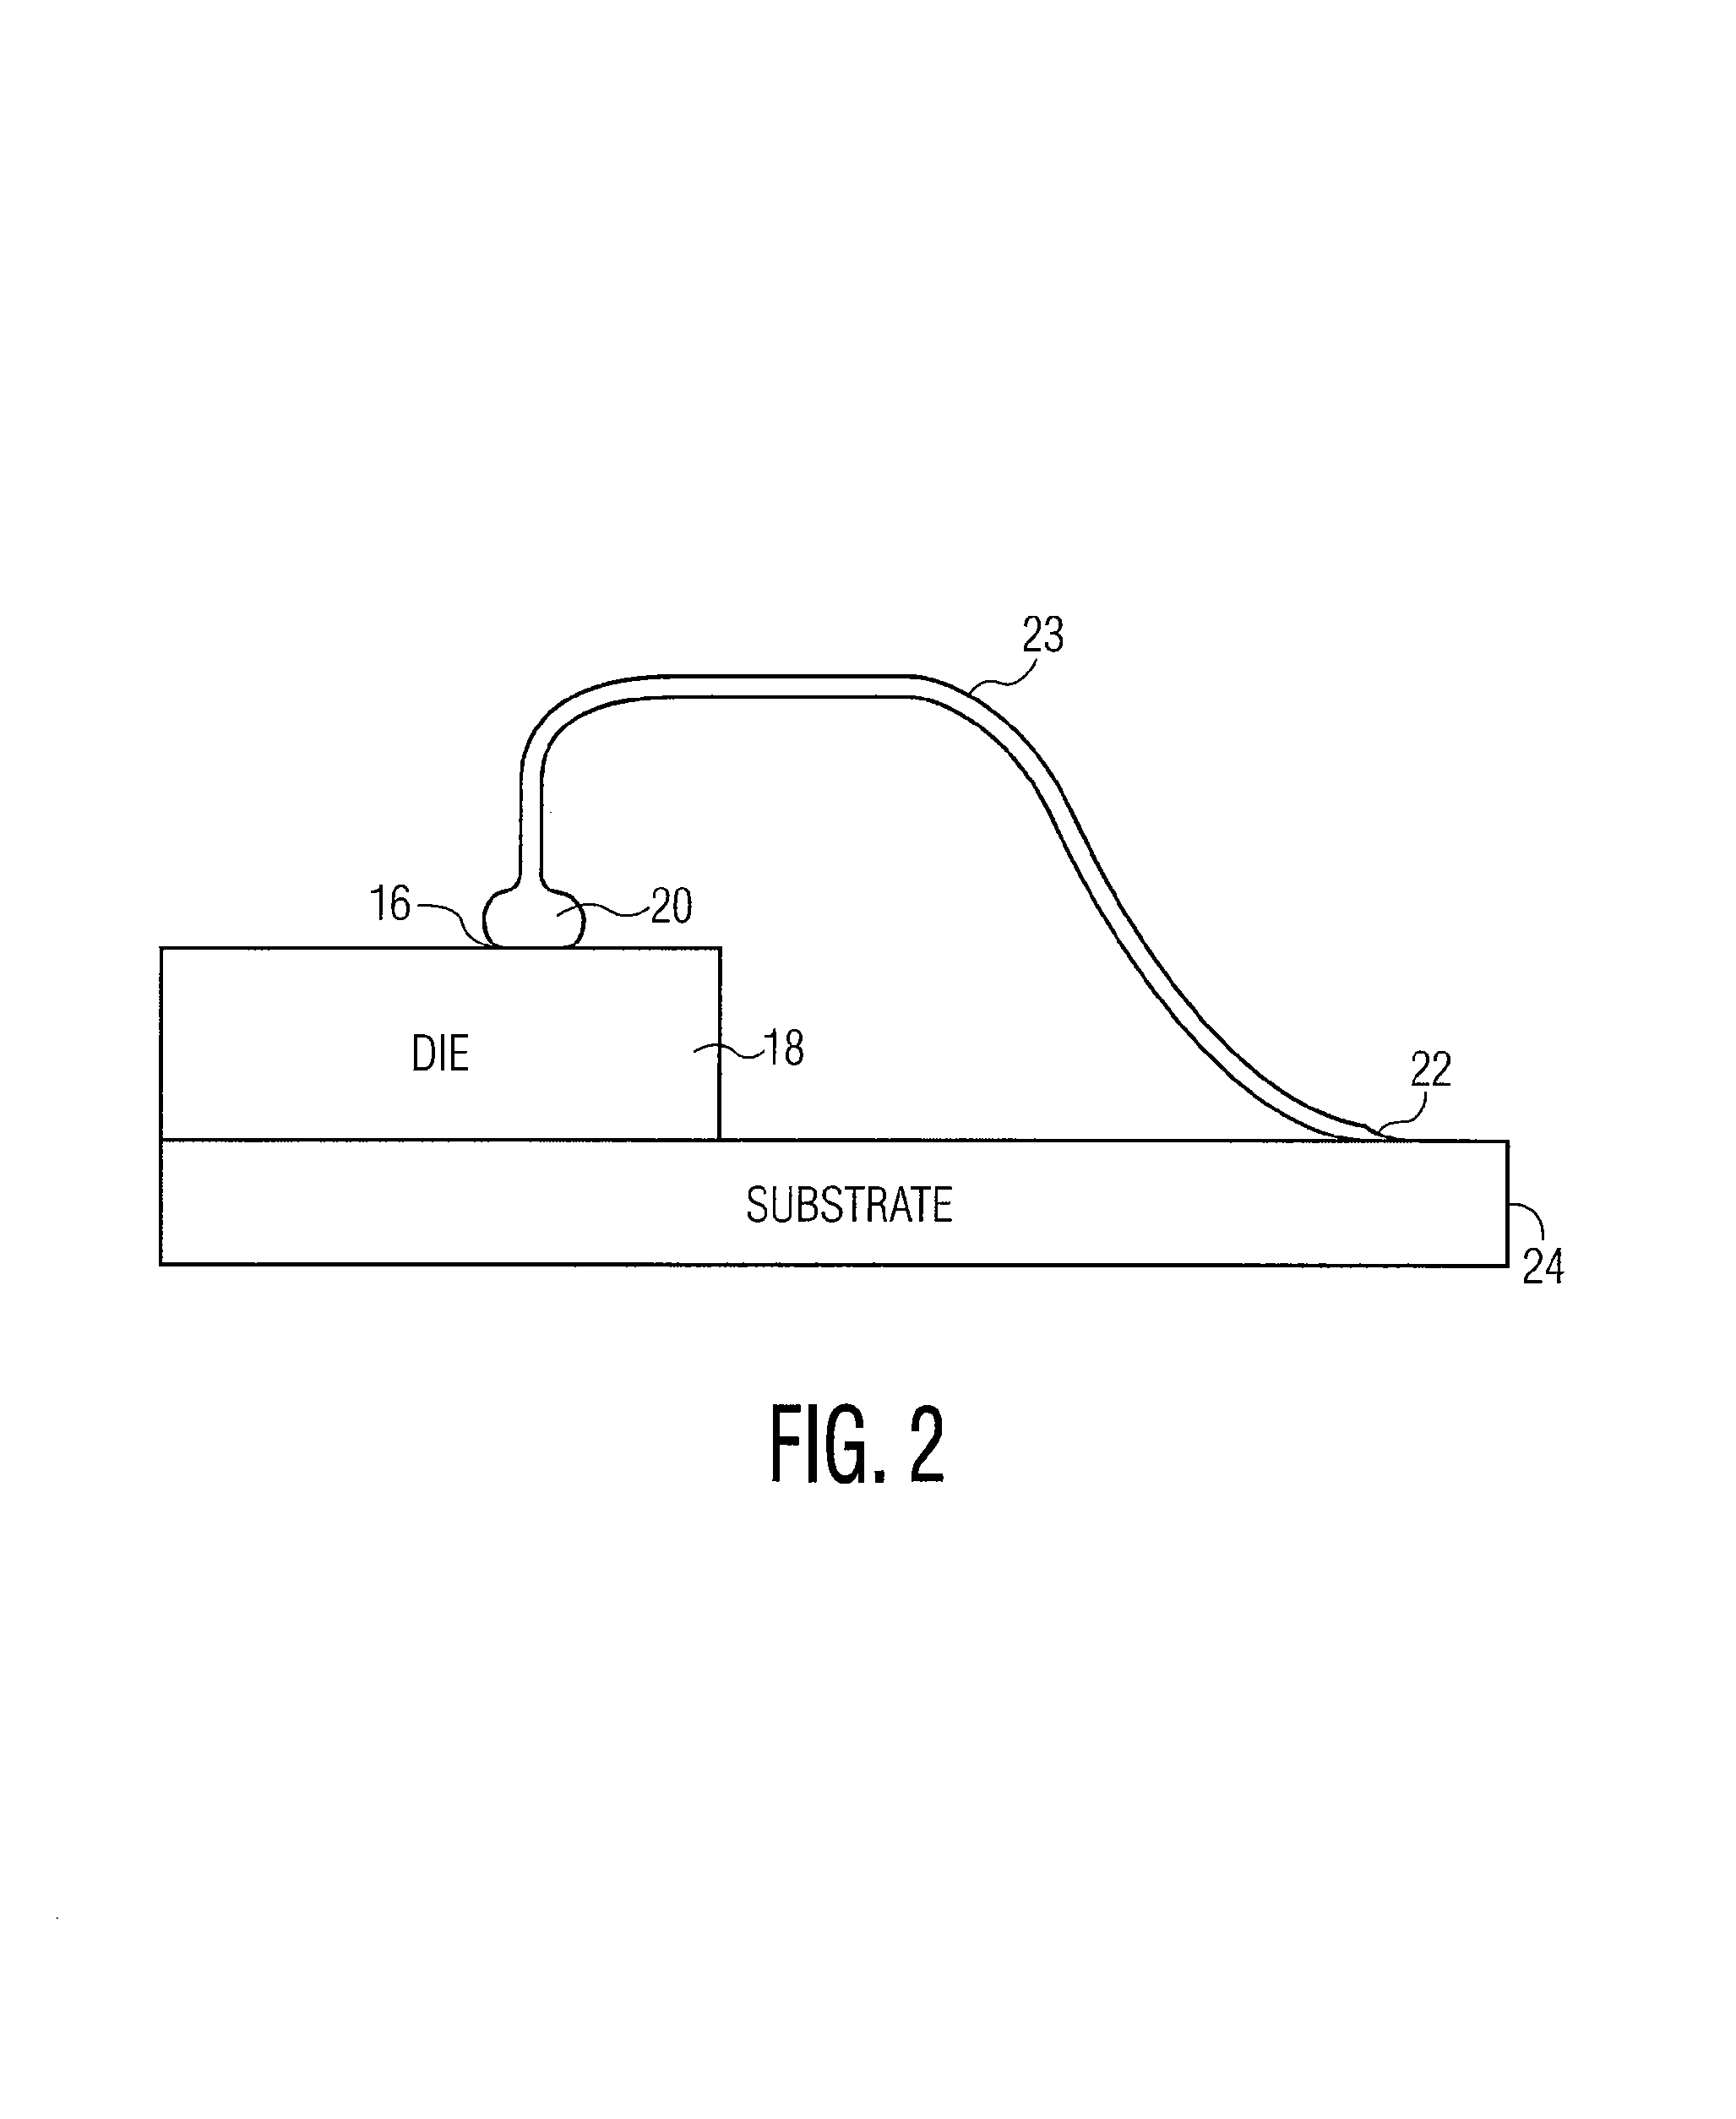 Method and apparatus for forming bumps for semiconductor interconnections using a wire bonding machine